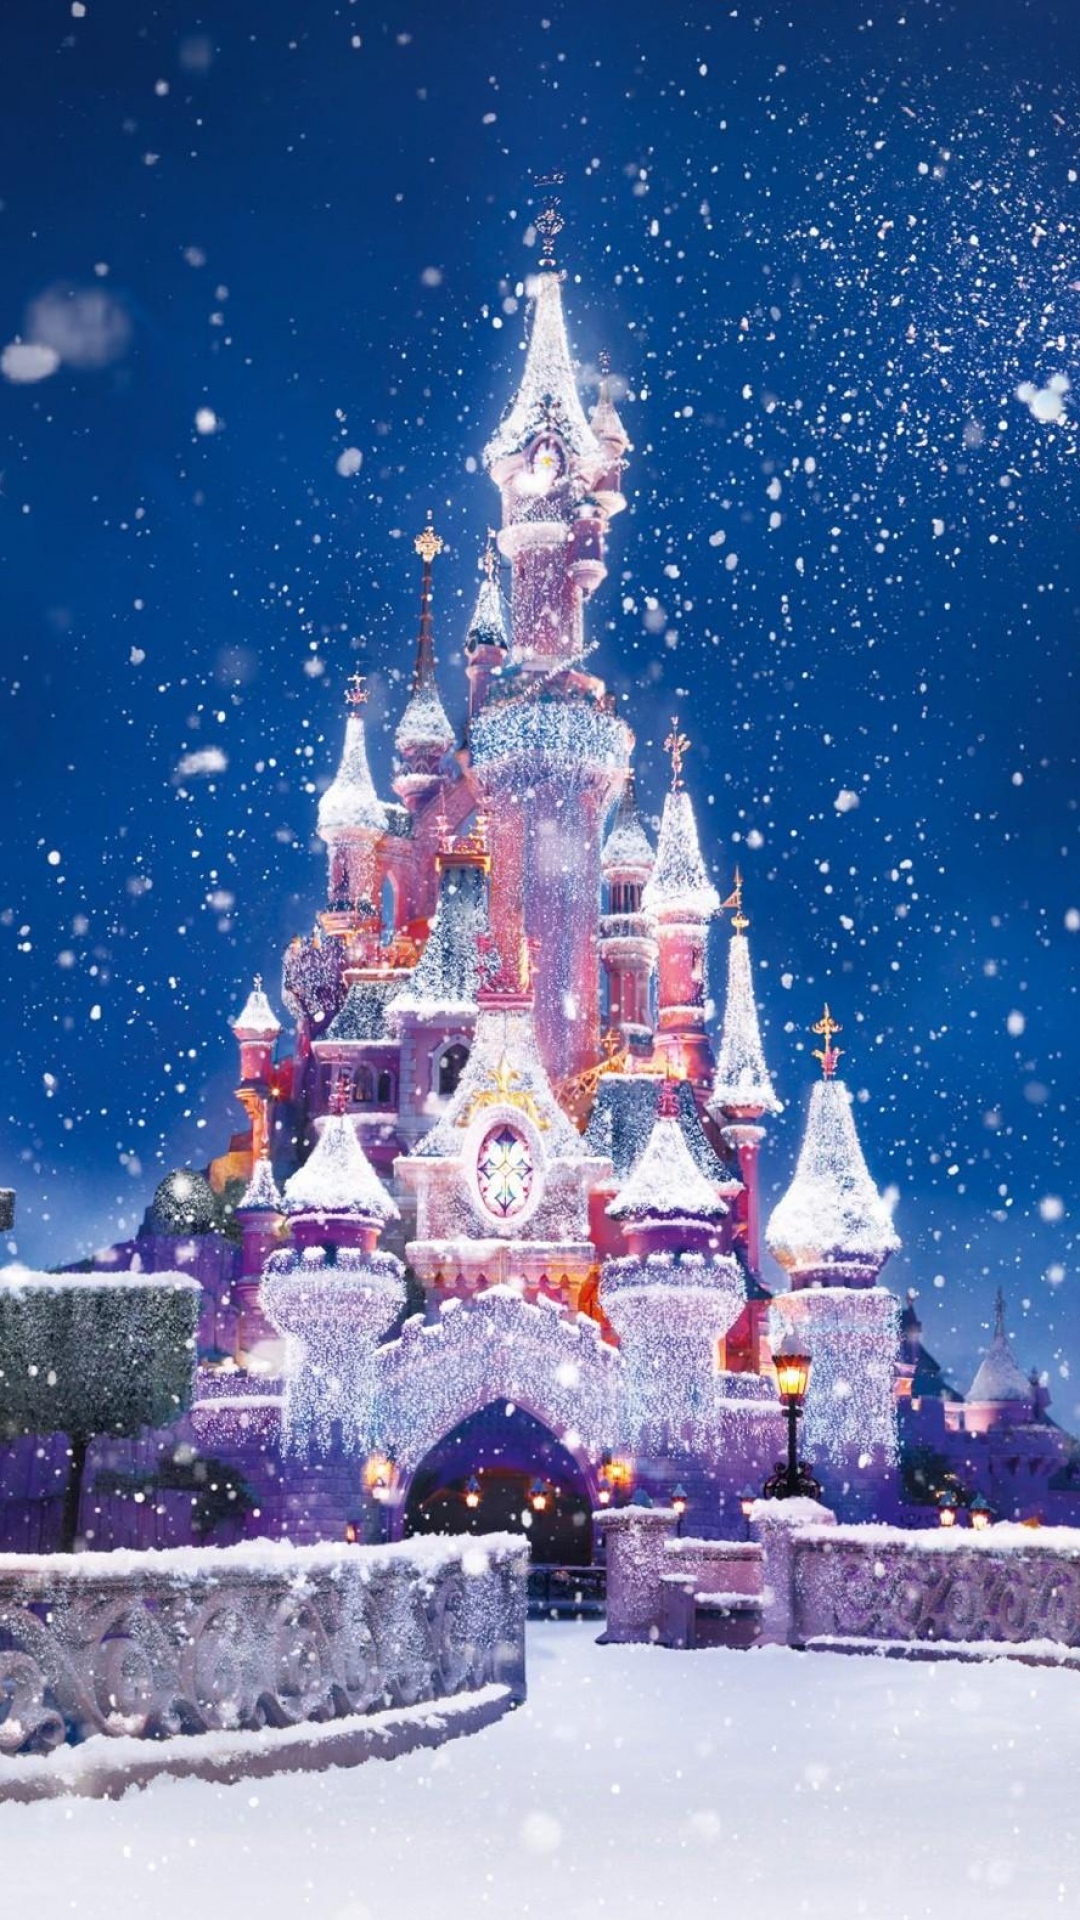 Disney Castle Christmas Lights Snow Android Wallpaper download 1080x1920